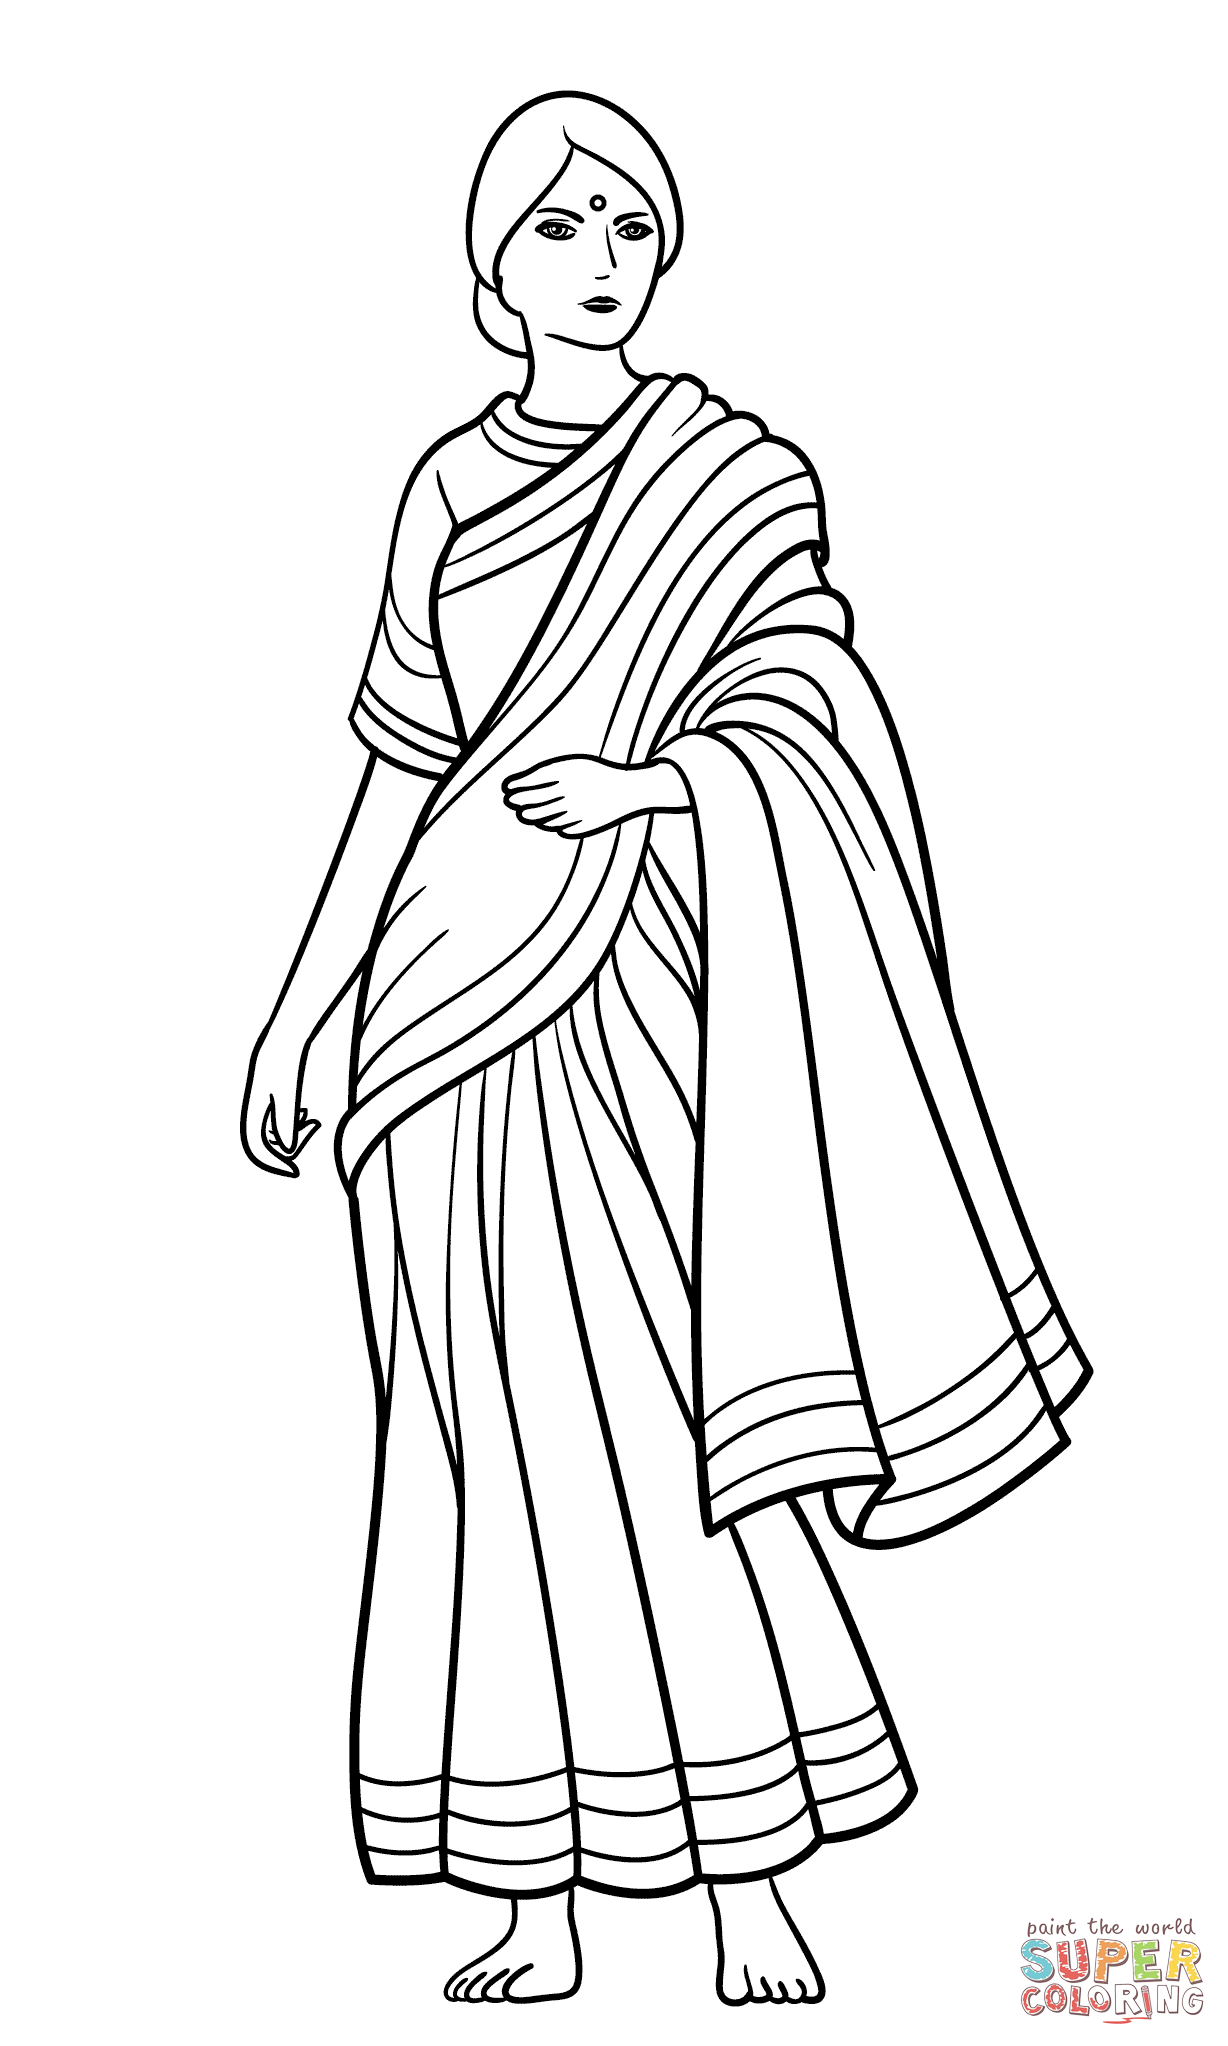 Indian Woman In Sari Coloring Page   Free Printable Coloring Pages ...